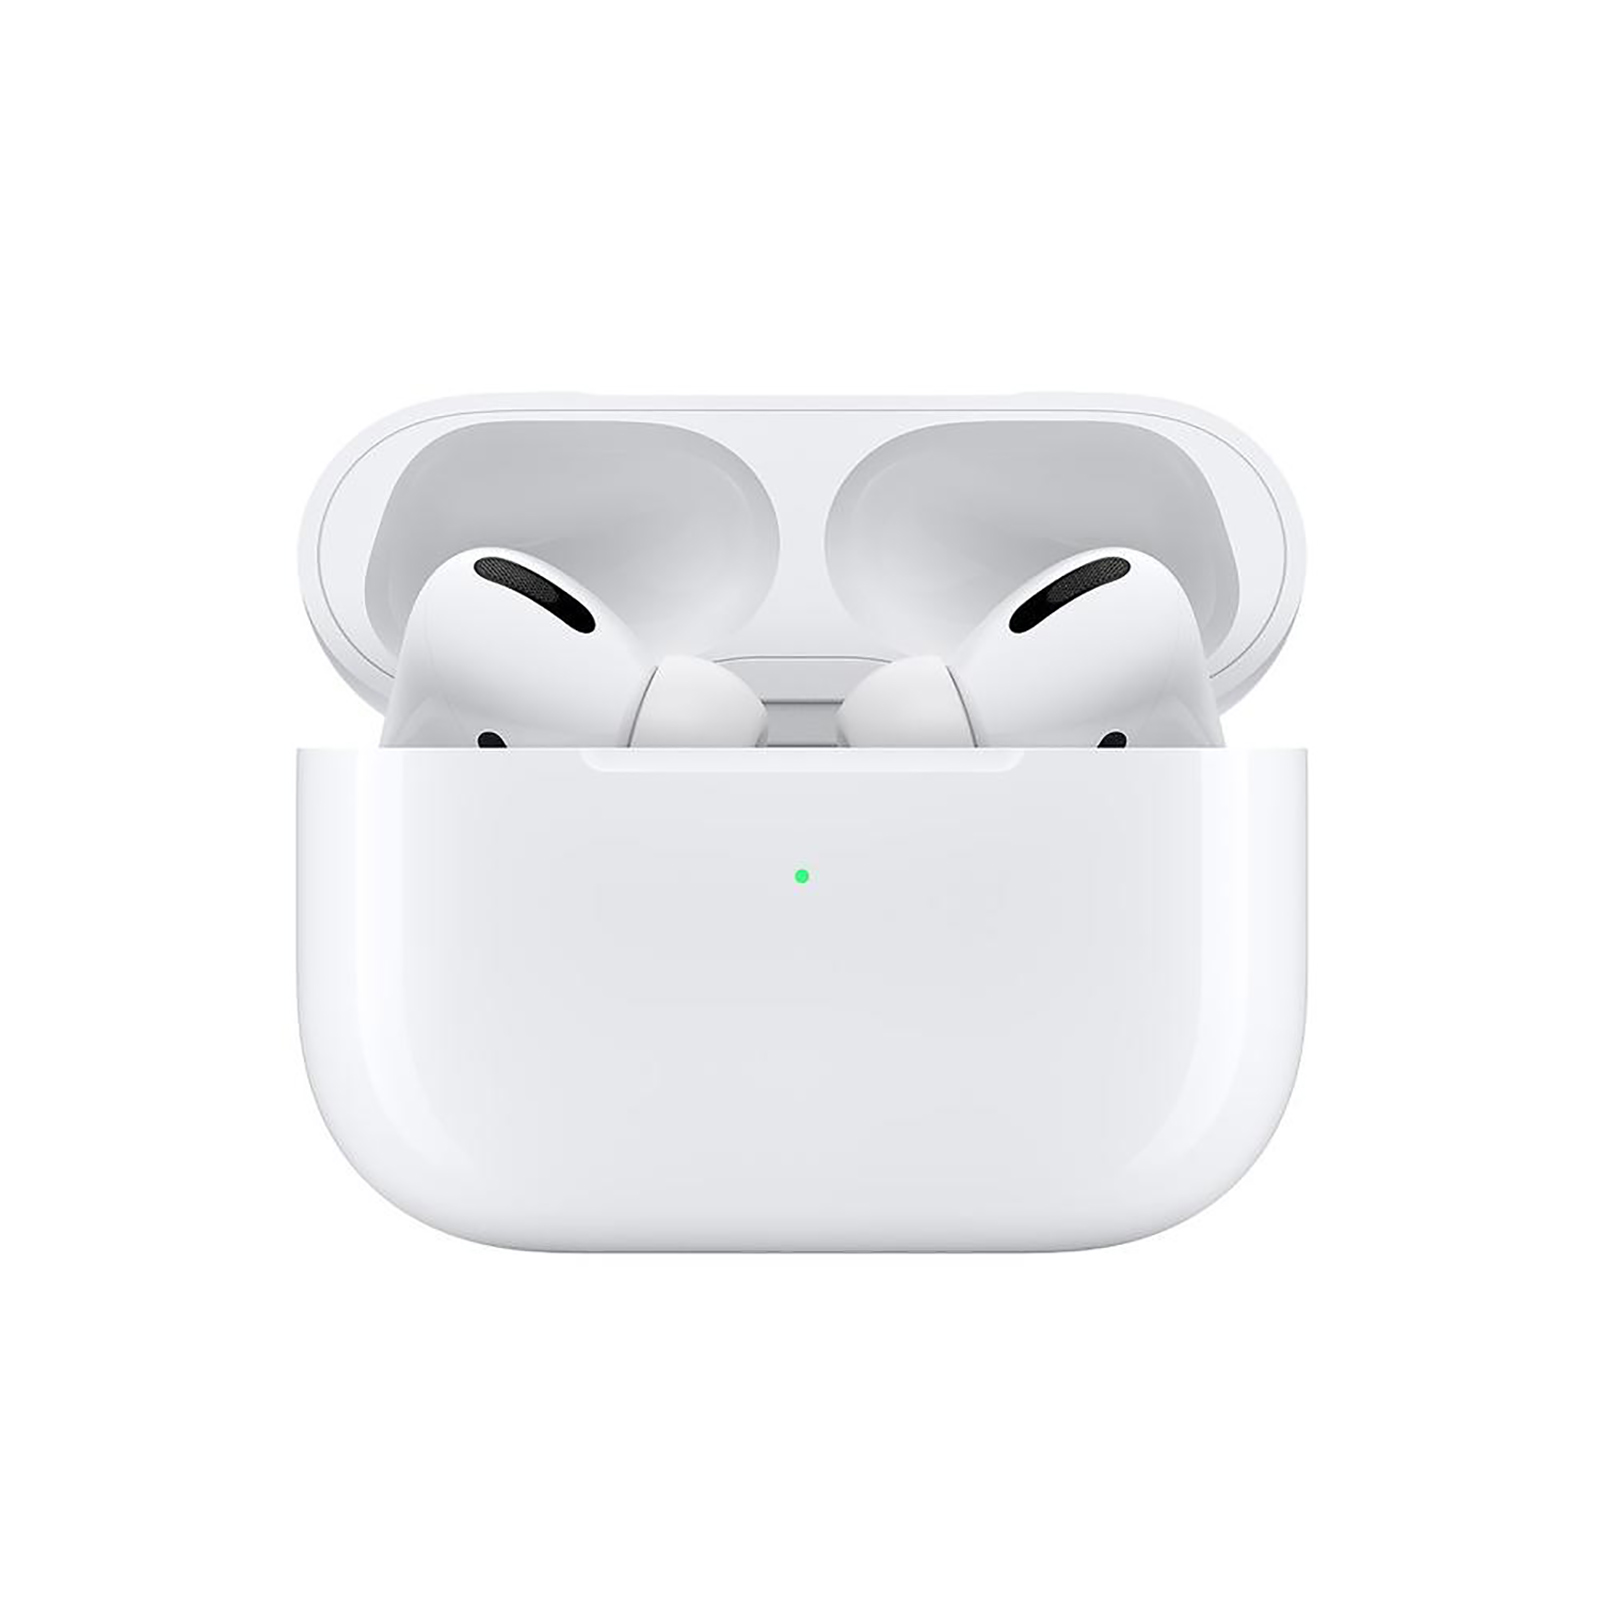 Apple a2083 AirPods Pro with Wireless Charging Case